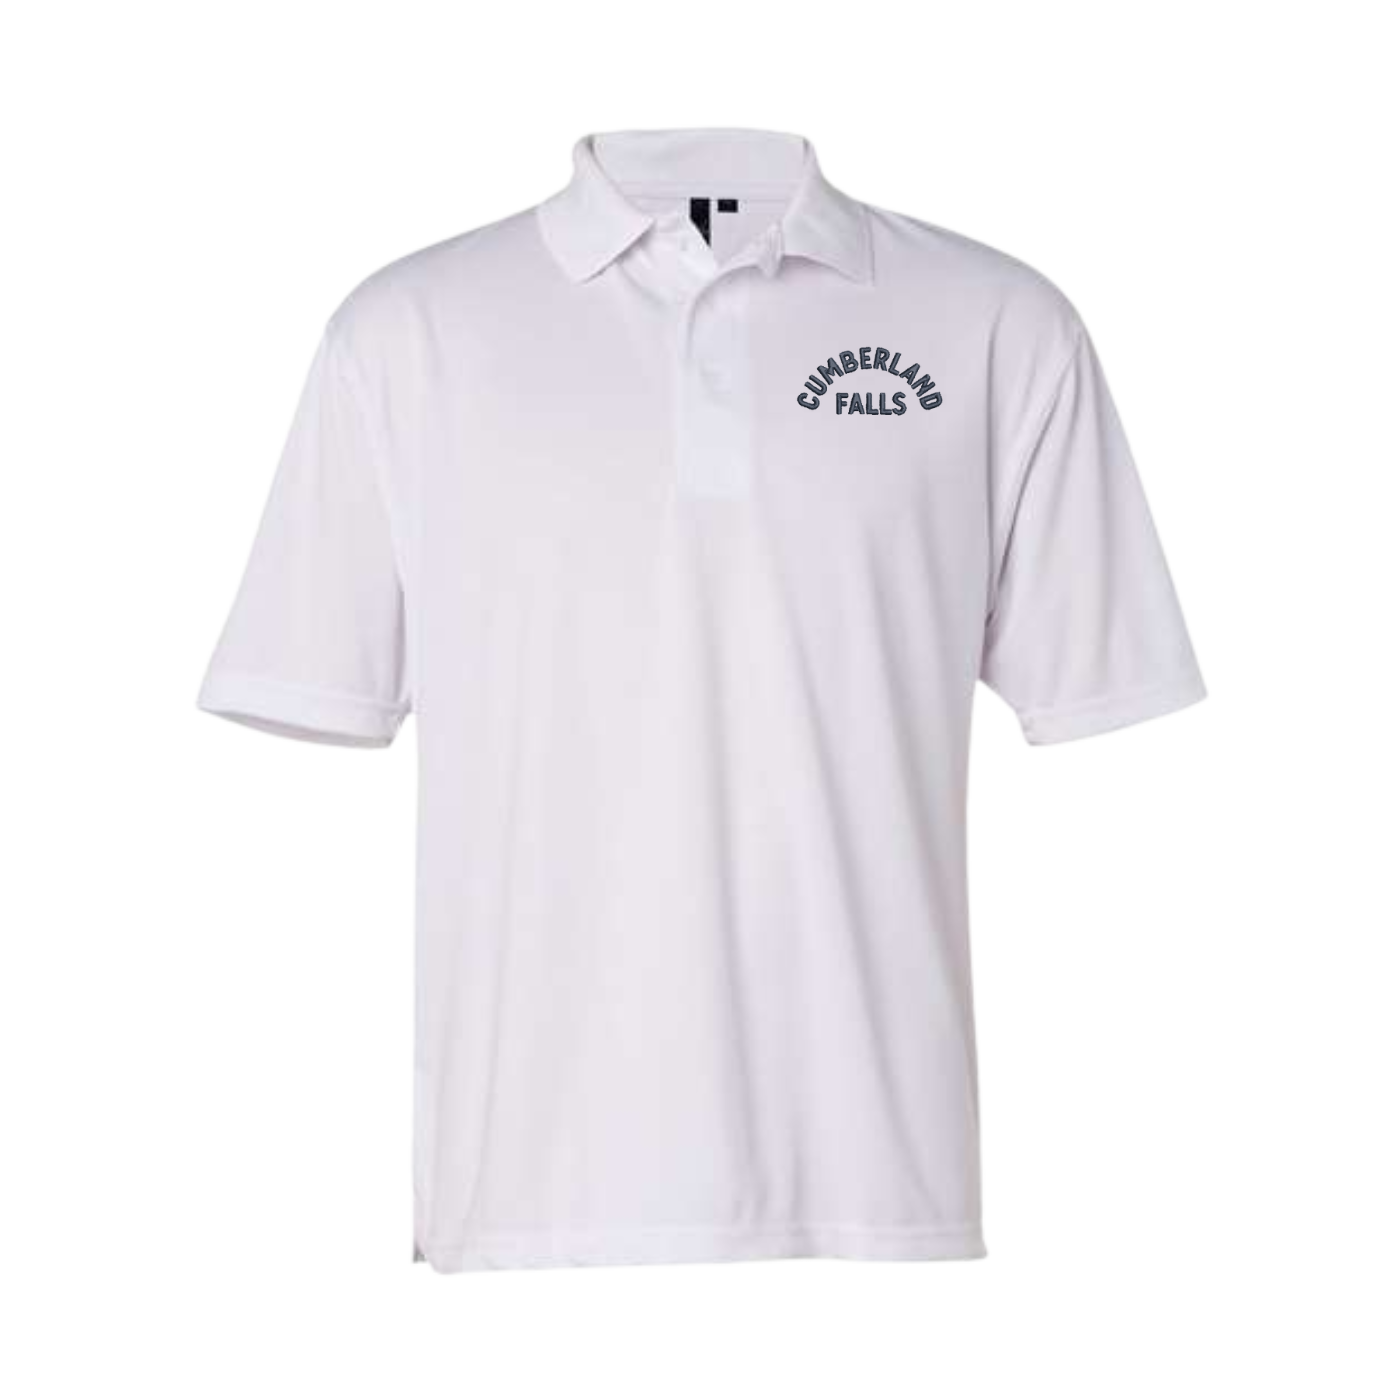 Cumberland Falls Men's Embroidered Polo Shirt